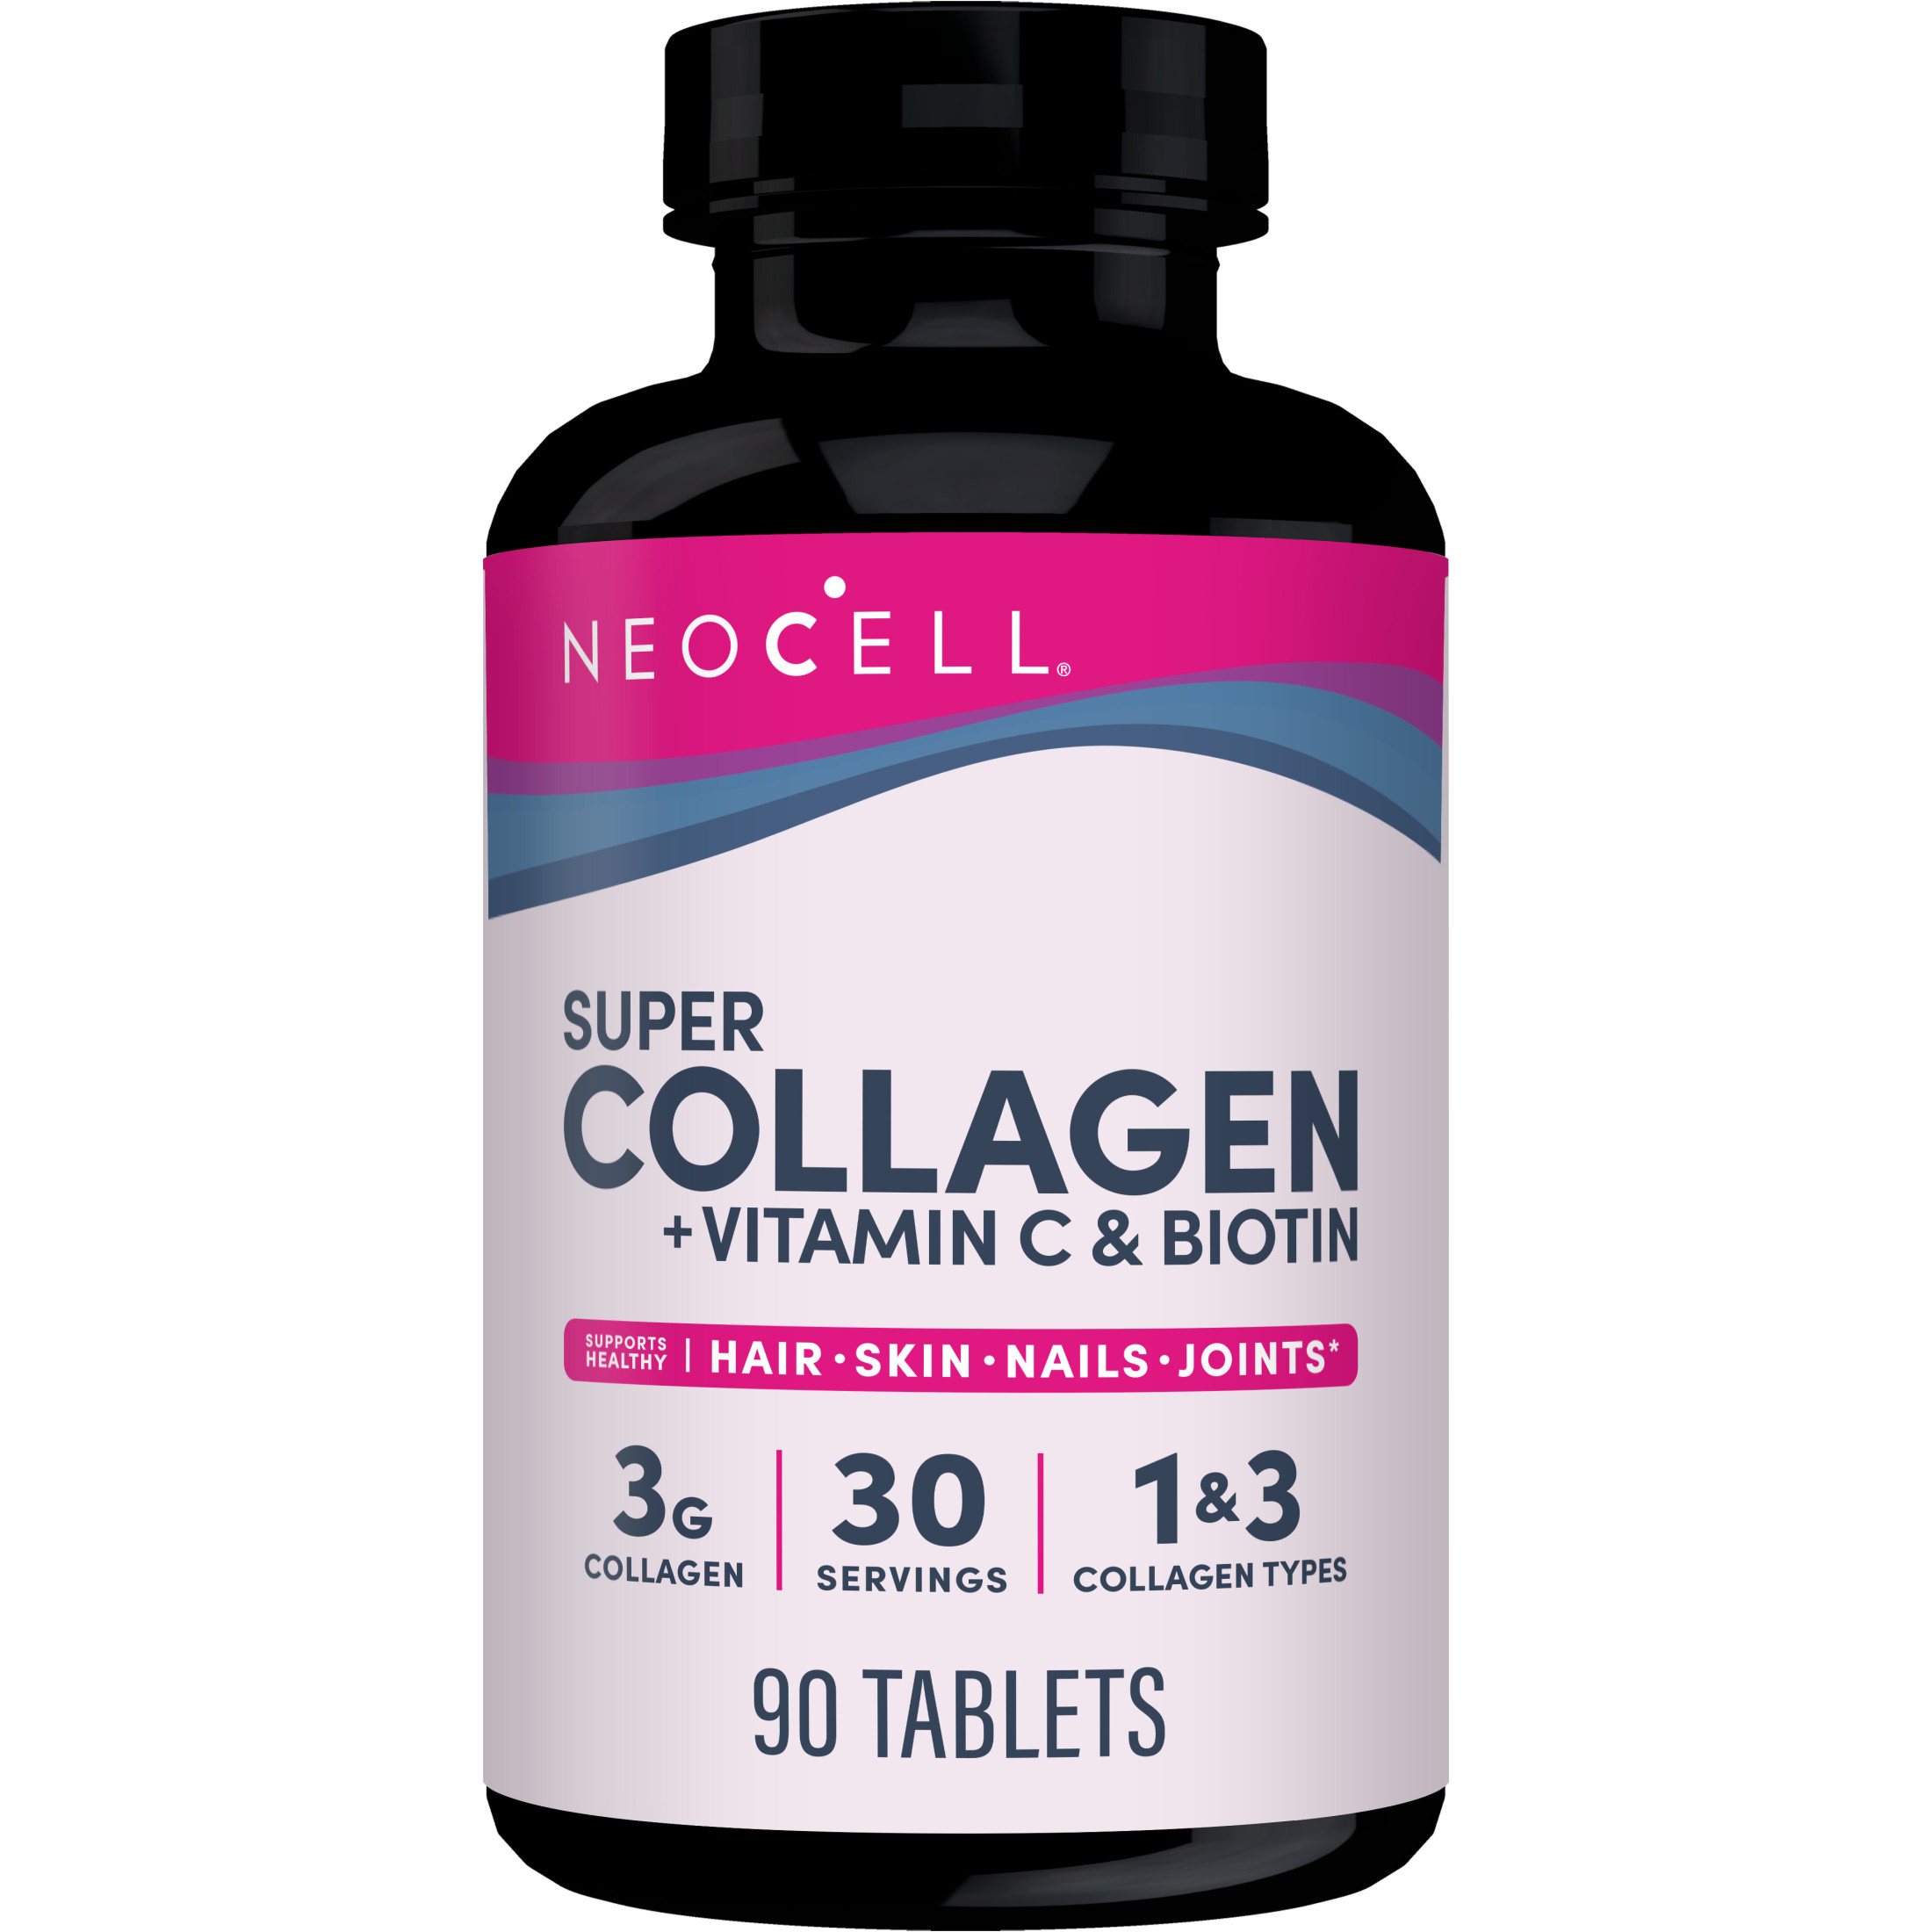 NeoCell Super Collagen + Vitamin C & Biotin, Supplement, for Hair, Skin, and Nails, 90 Tablets - image 1 of 8